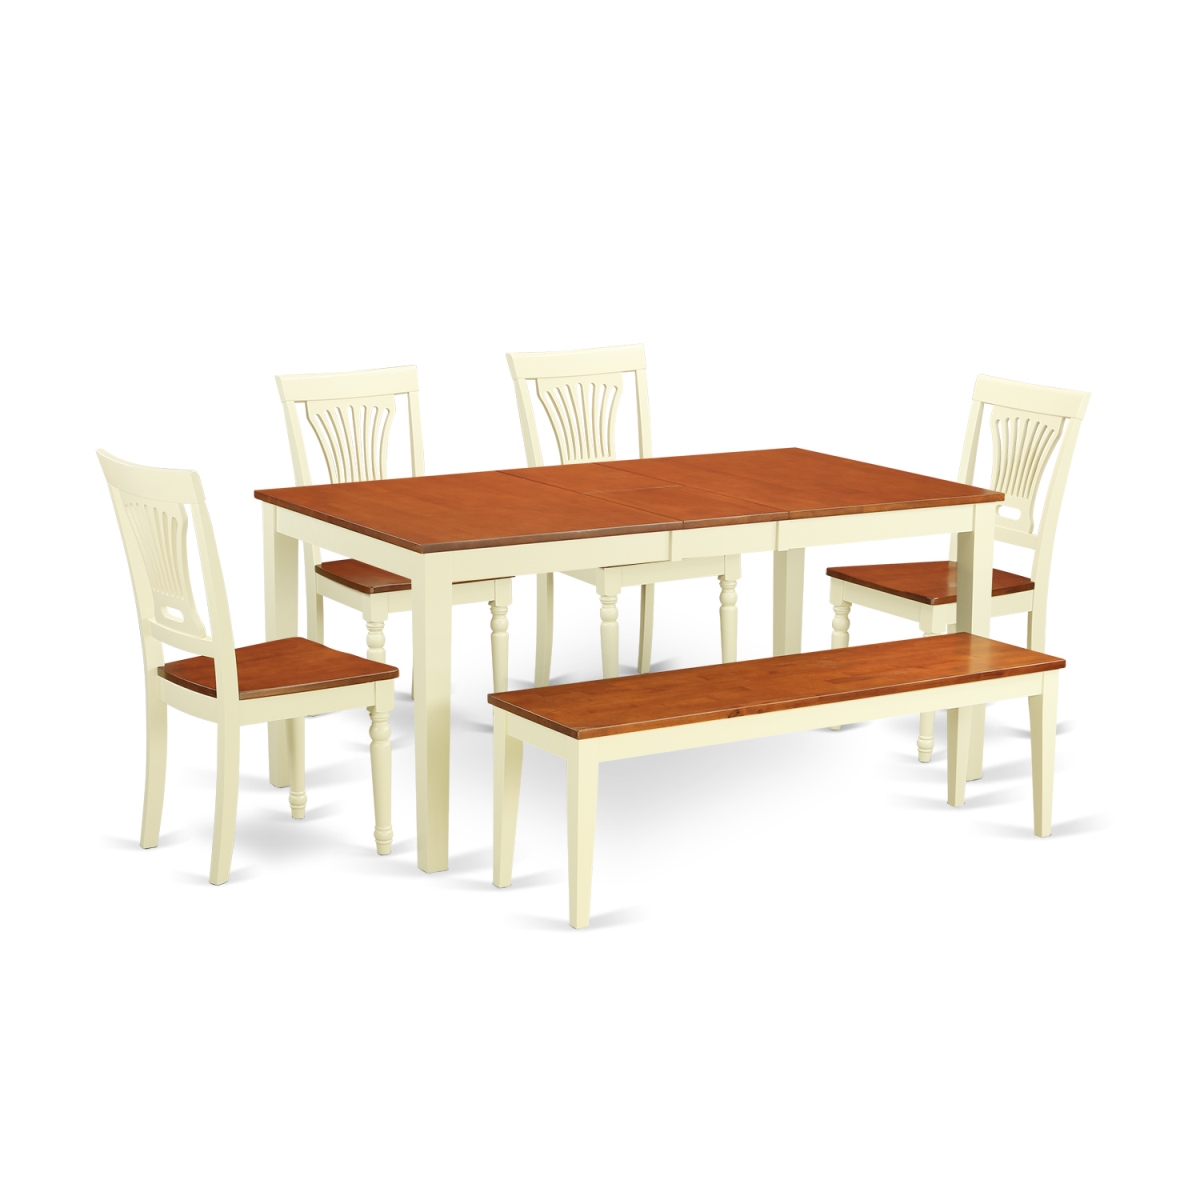 Dinette Table Set - Table & 4 Chairs Coupled With A Bench, Buttermilk & Cherry - 6 Piece